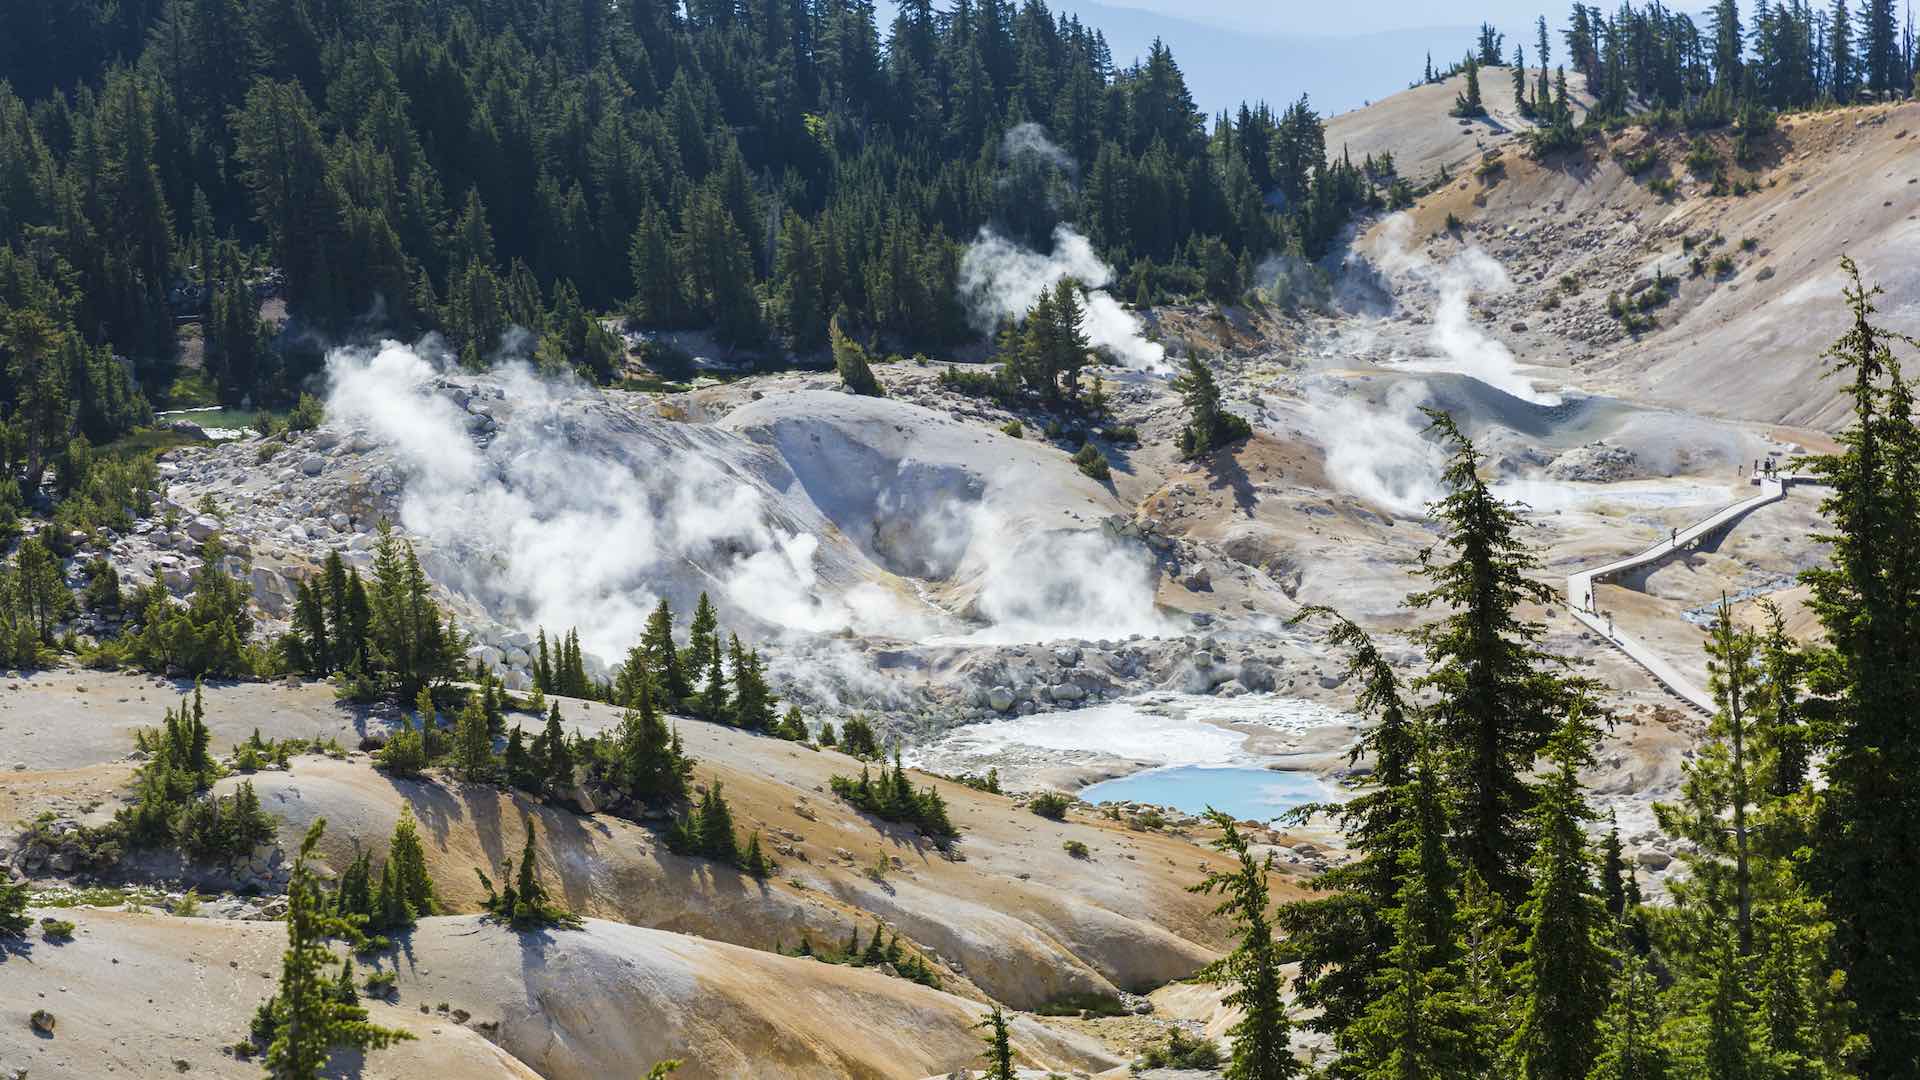 Landscape view of the geothermal features of Bumpass Hell in Lassen Volcanic National Park (California).